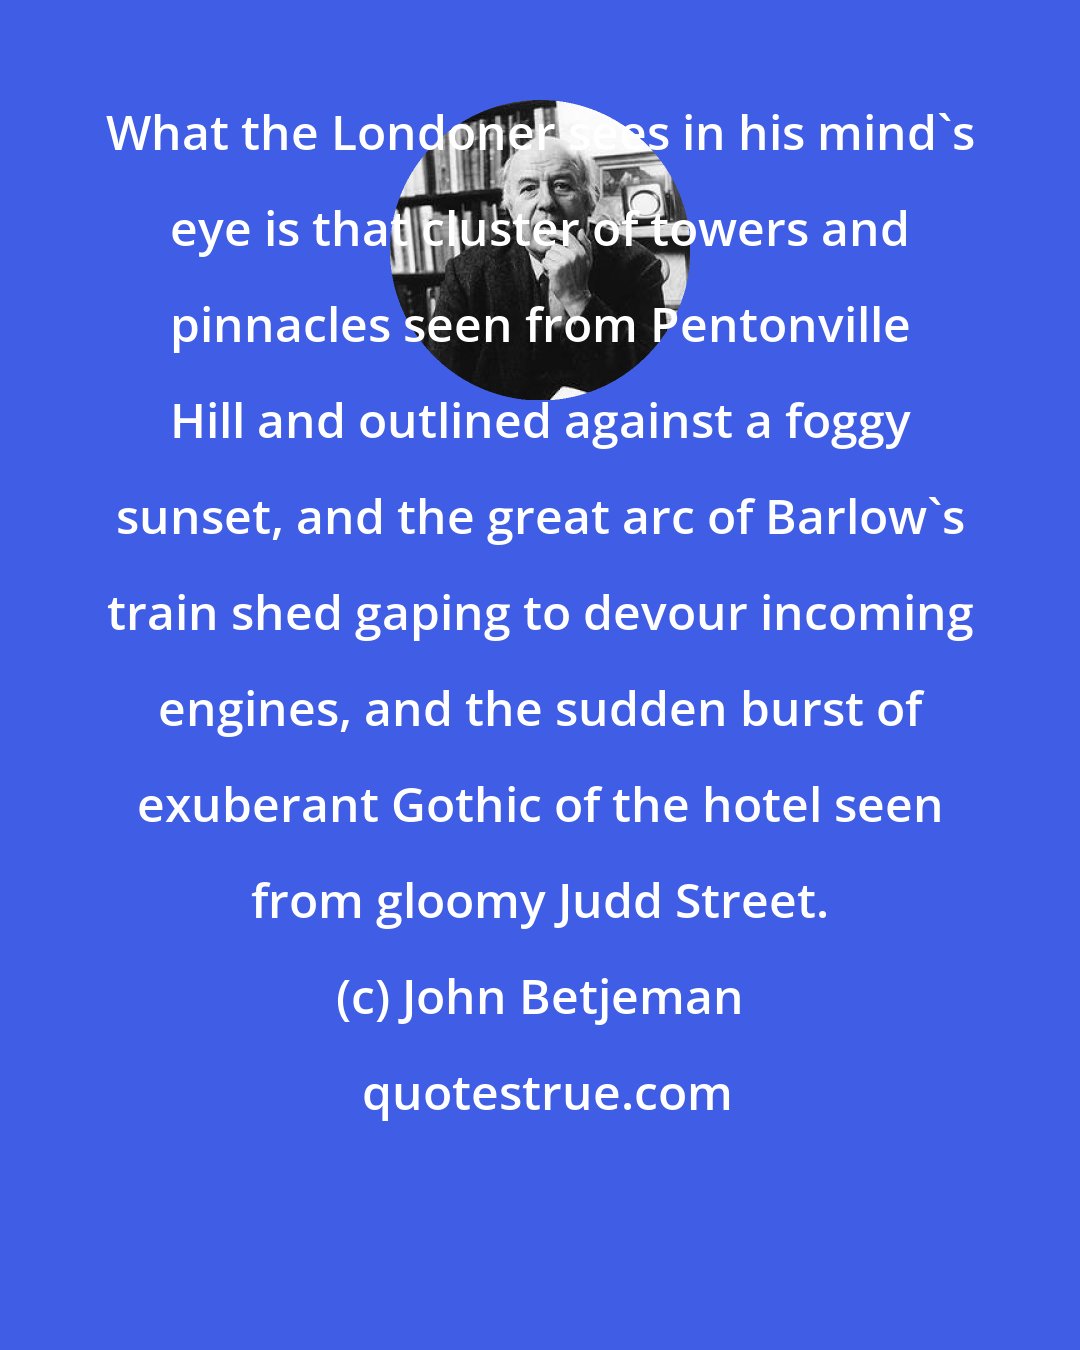 John Betjeman: What the Londoner sees in his mind's eye is that cluster of towers and pinnacles seen from Pentonville Hill and outlined against a foggy sunset, and the great arc of Barlow's train shed gaping to devour incoming engines, and the sudden burst of exuberant Gothic of the hotel seen from gloomy Judd Street.